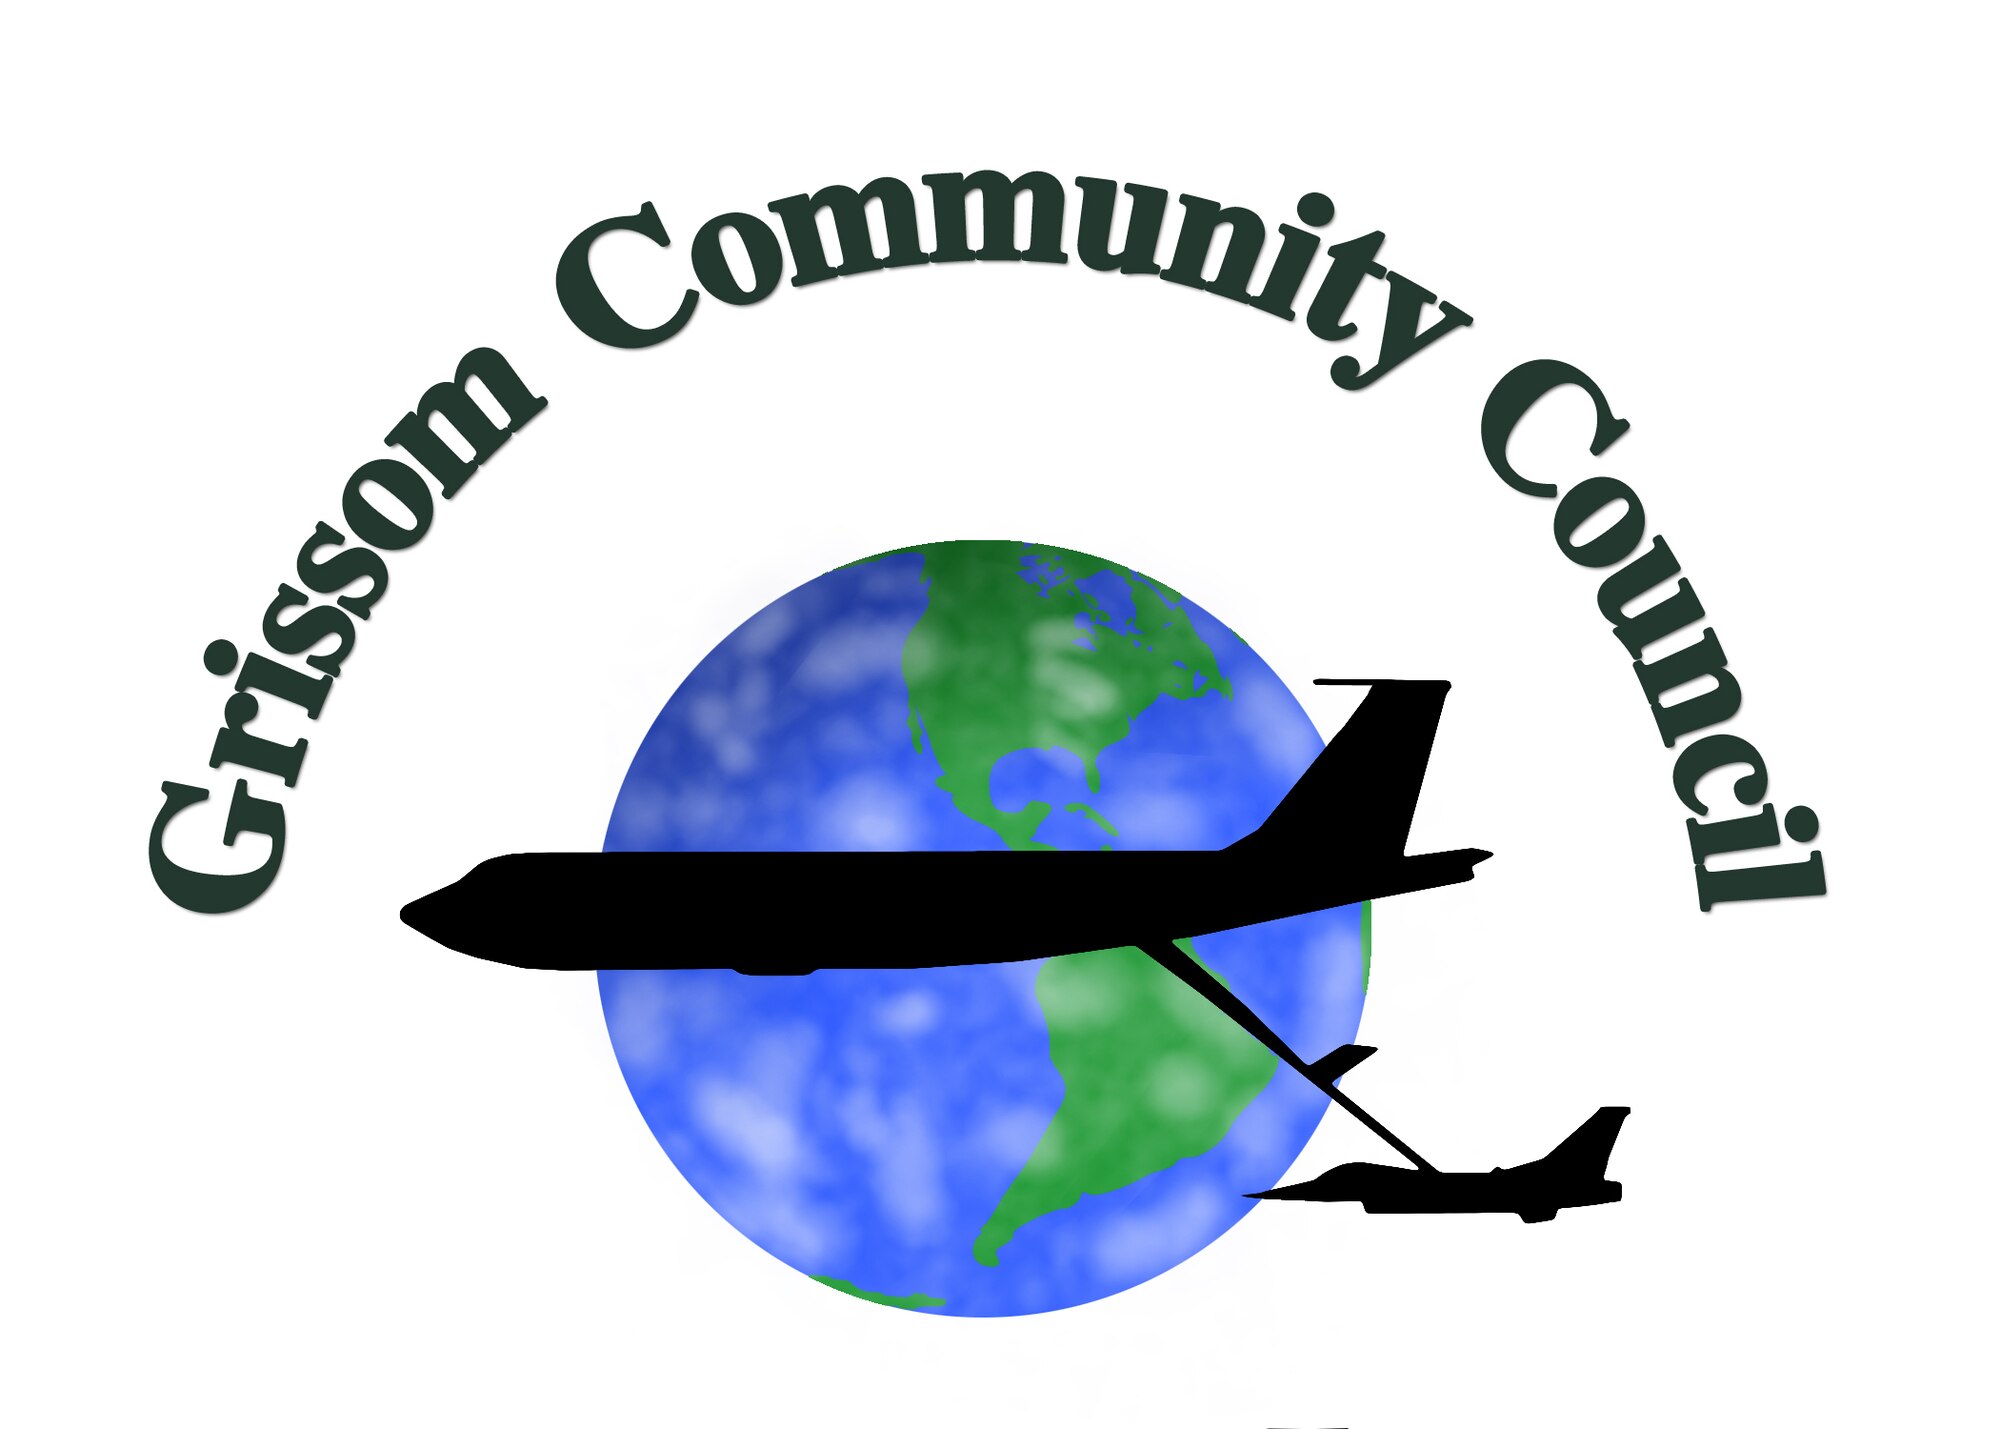 The Grissom Community Council is a non-profit organization created to support the men and women at Grissom Air Reserve Base, Ind..